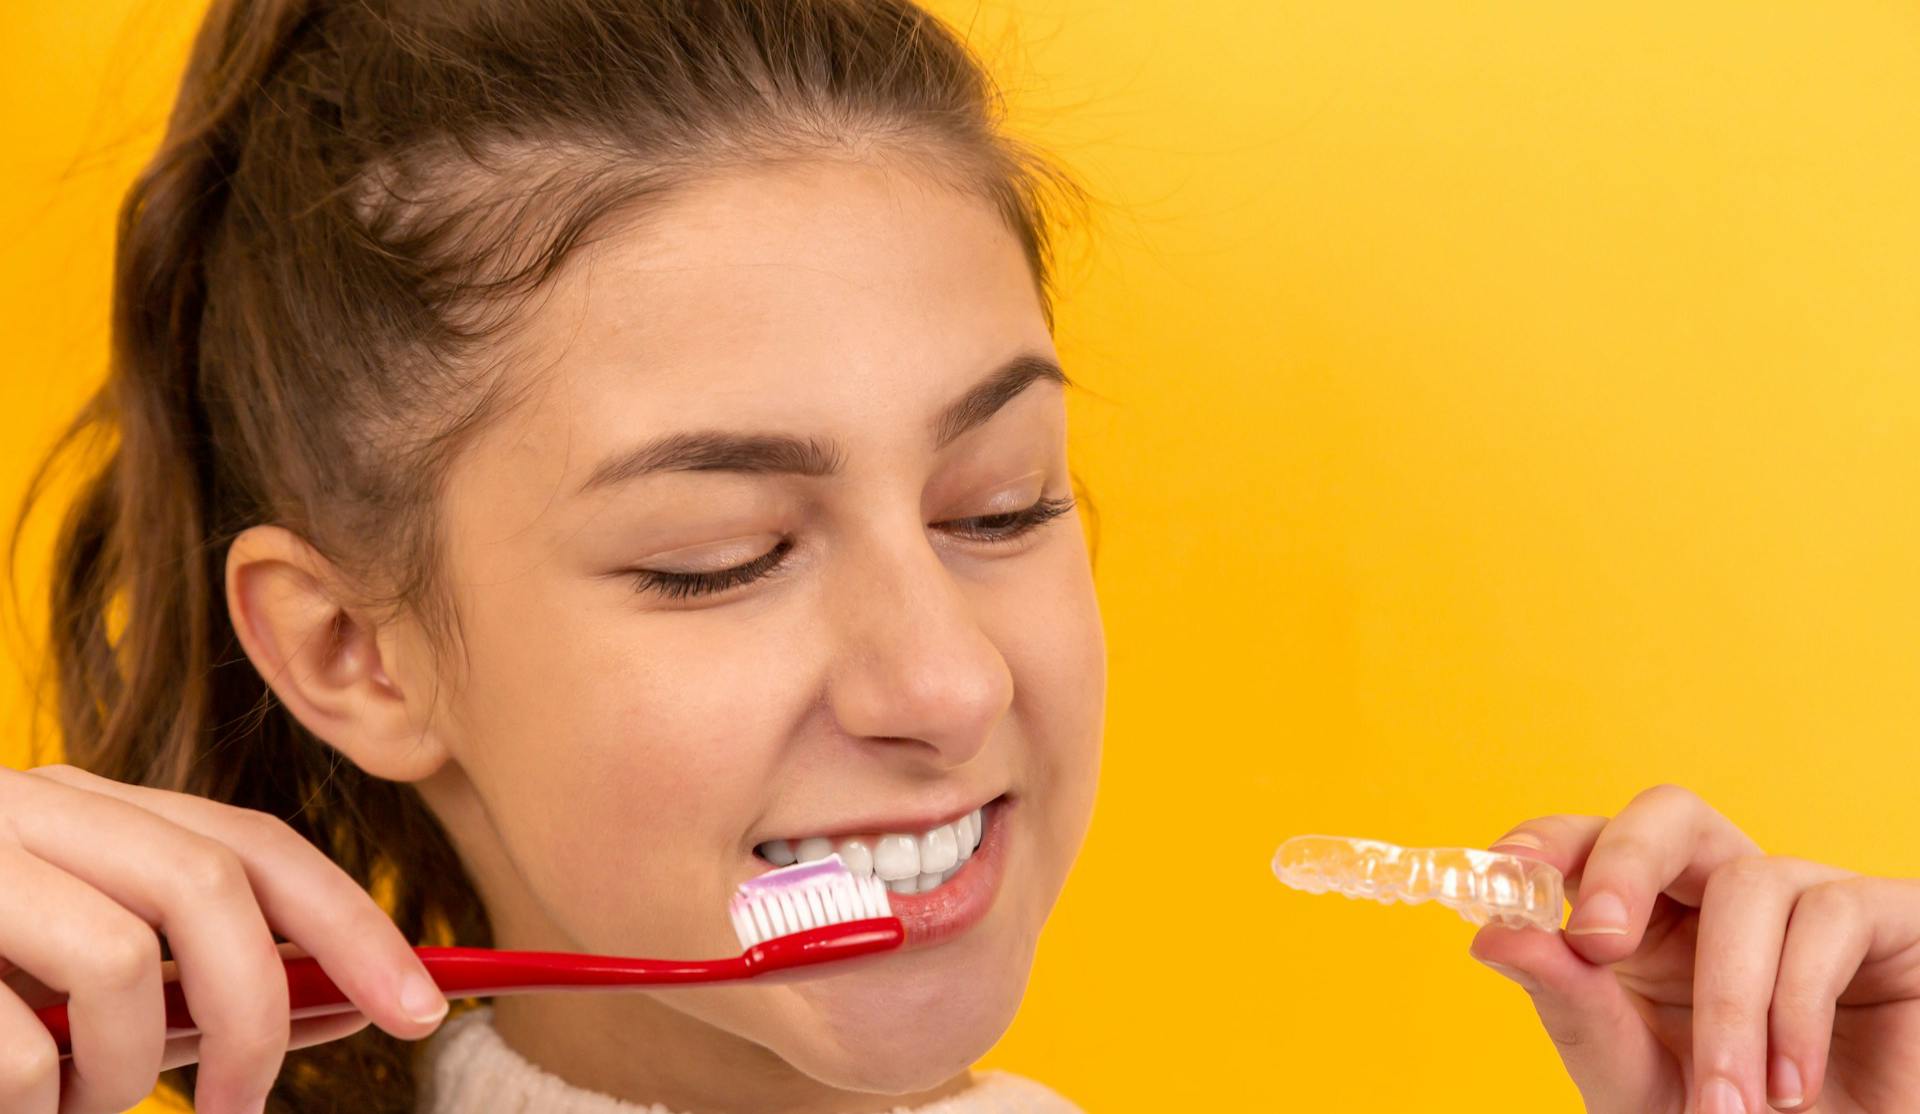 6 Simple Things You Can Do To Improve Your Oral Health